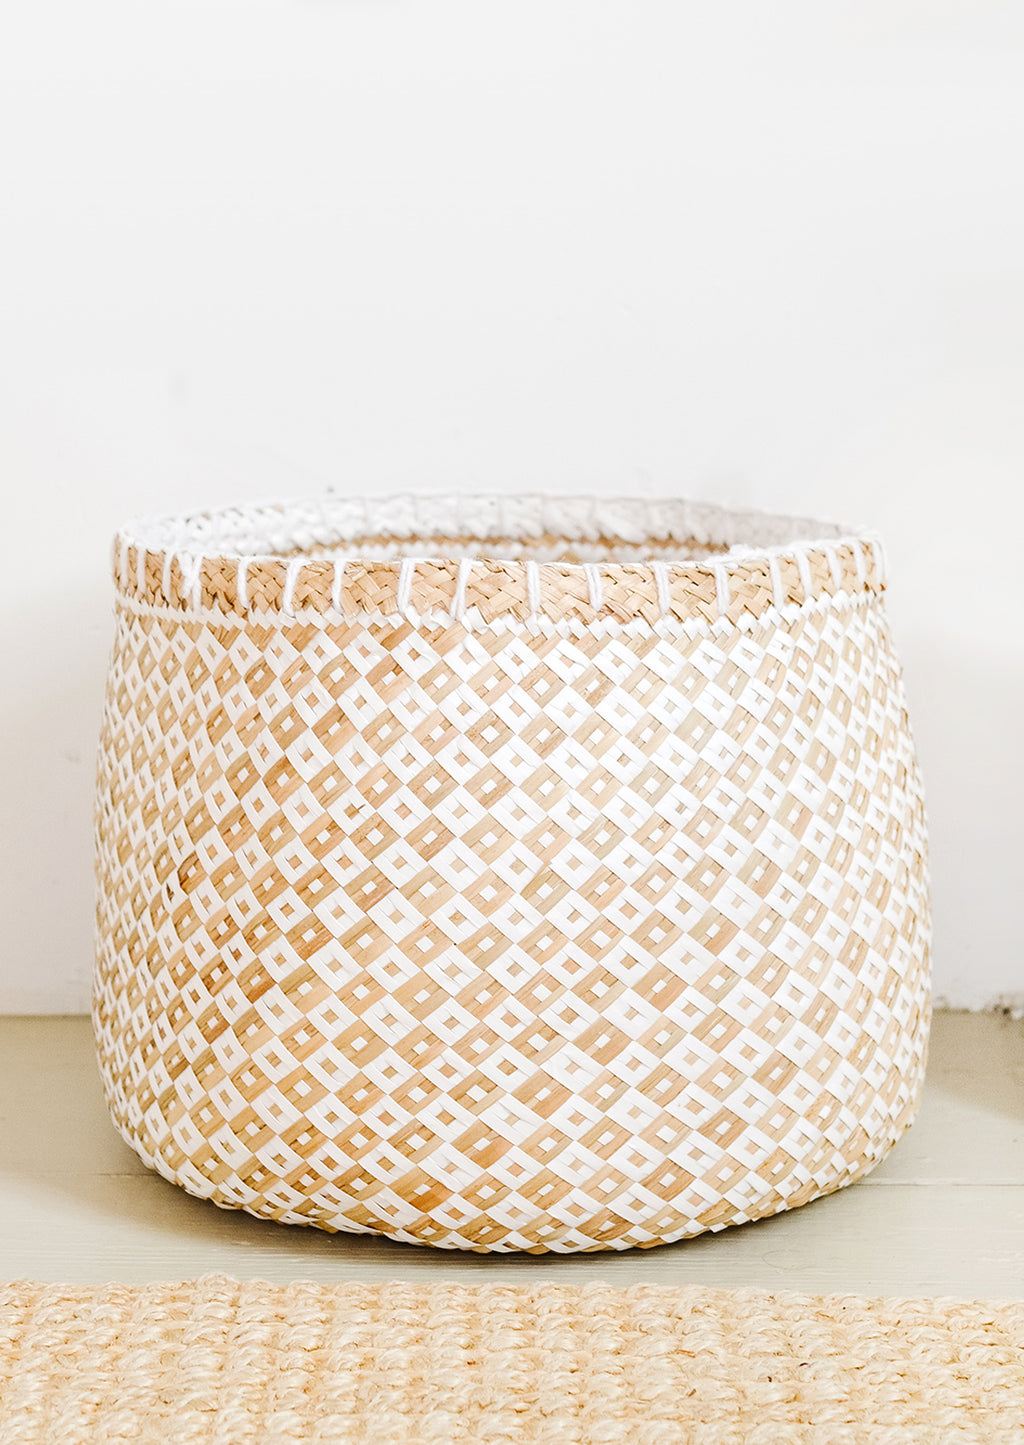 2: A round storage basket in natural straw and white paper.